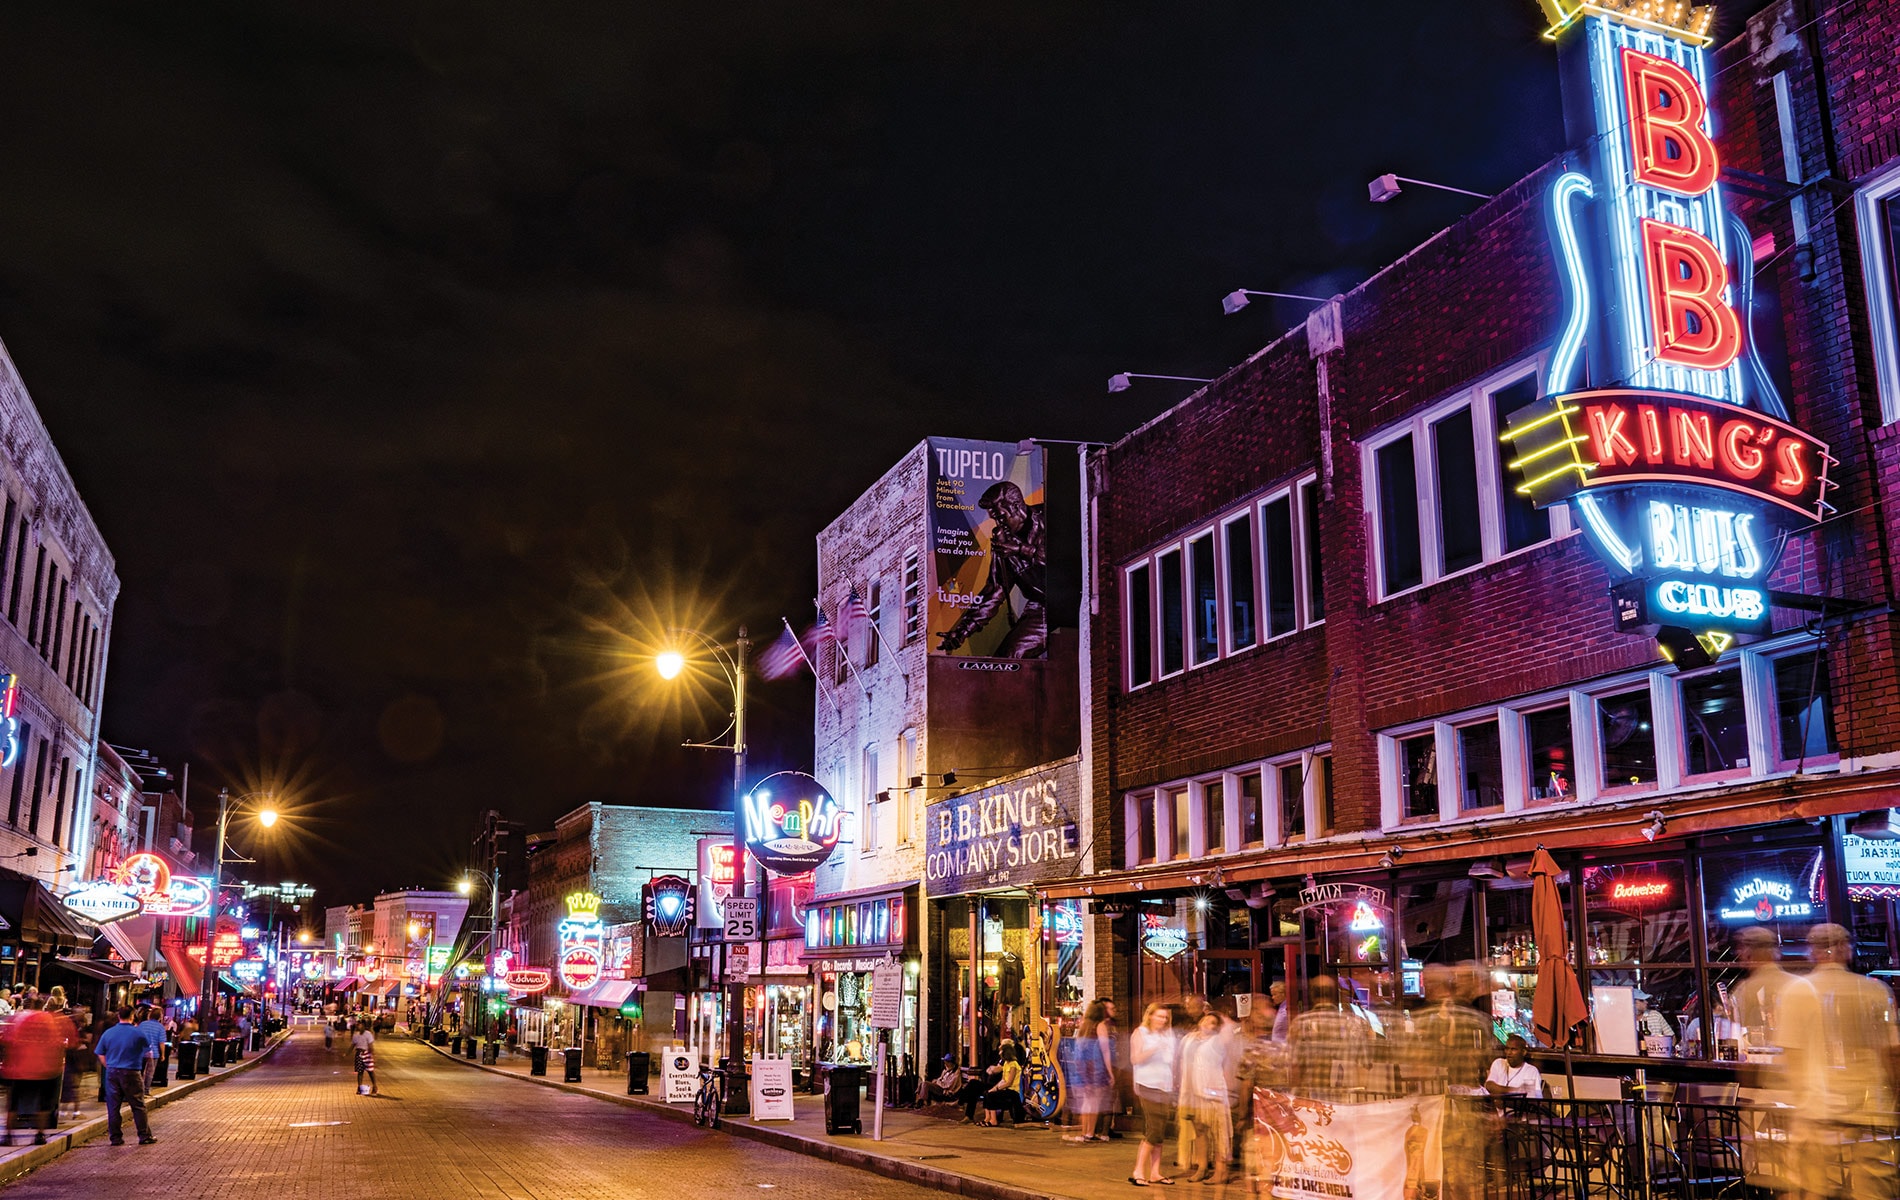 Beale Street in Memphis, Tennessee, is a popular destination for dining and live music. VIE Magazine, March 2018